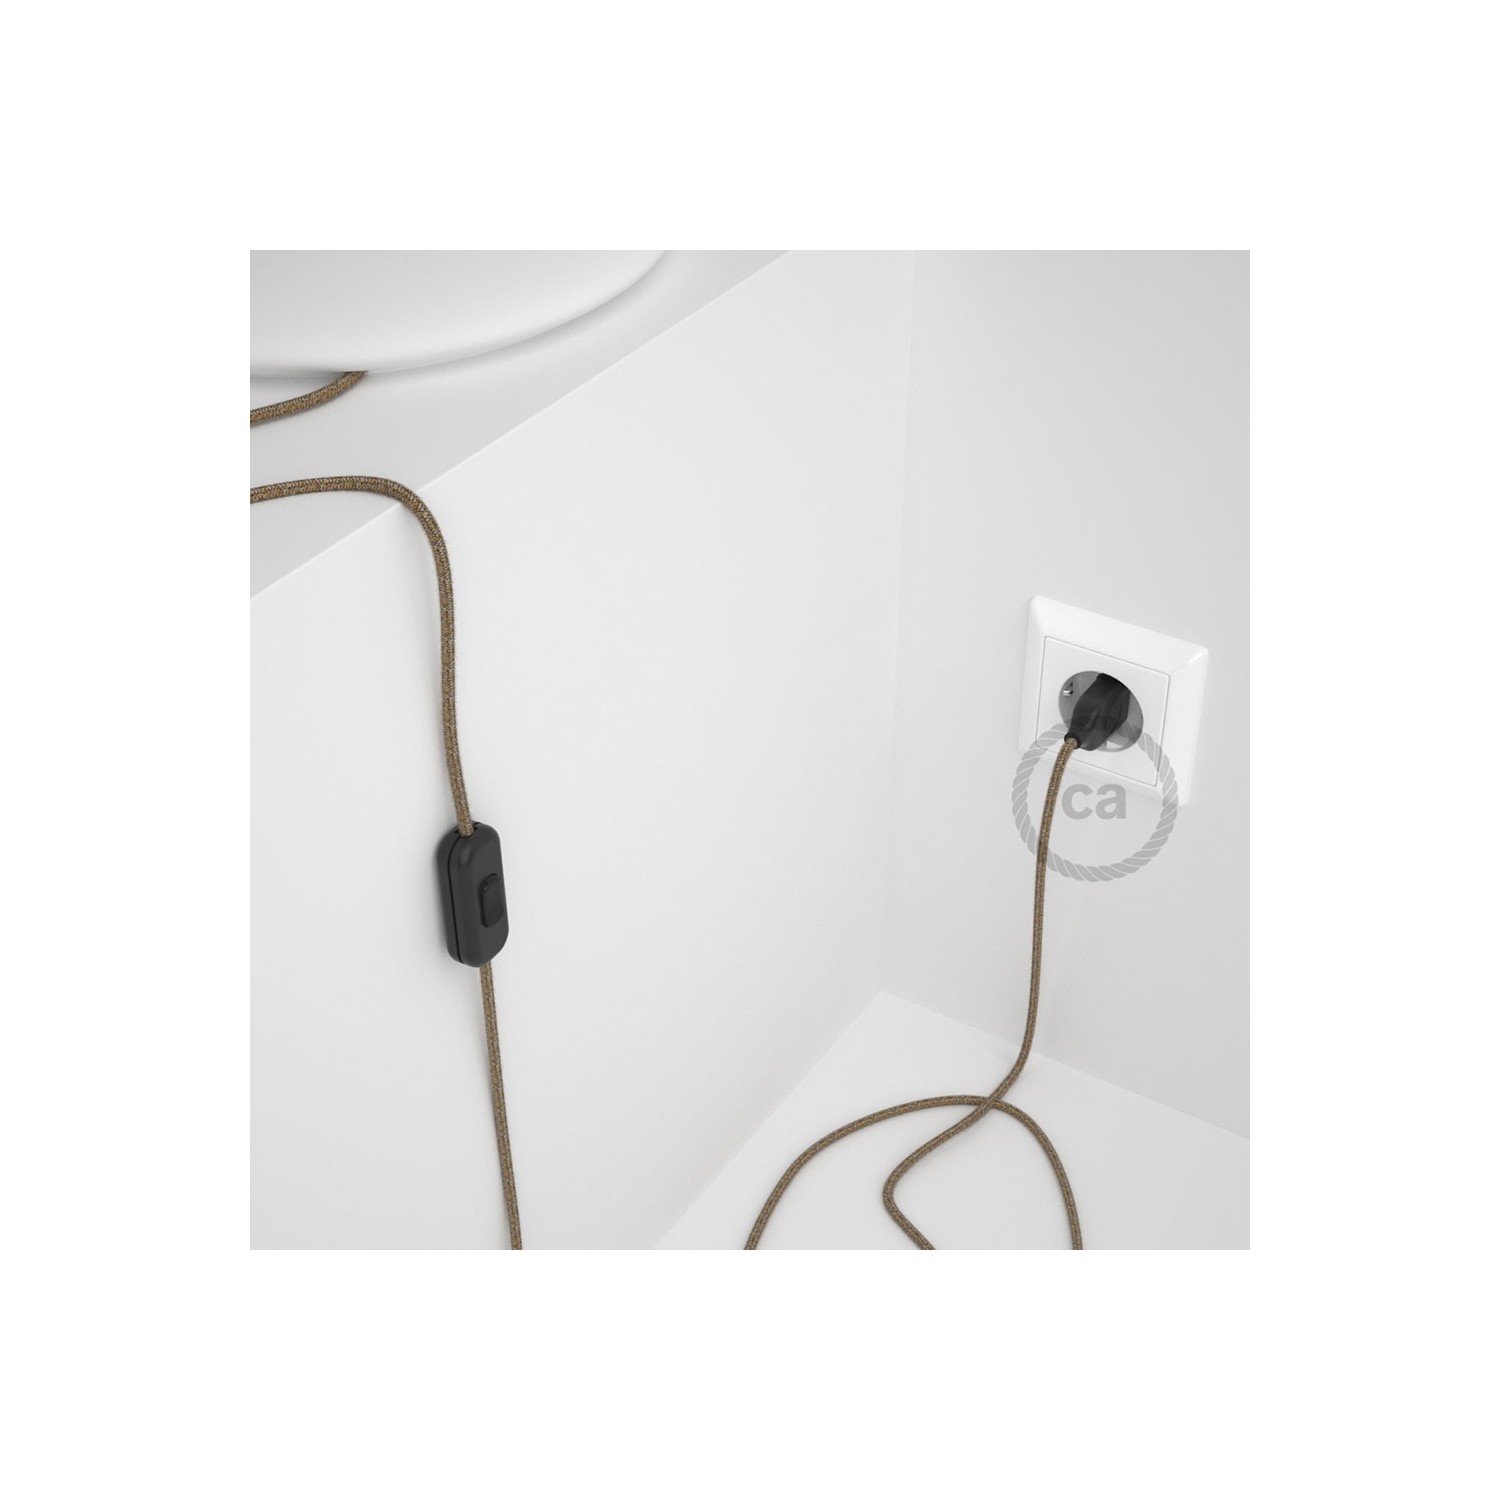 Lamp wiring, RS82 Brown Cotton and Natural Linen 1,80 m. Choose the colour of the switch and plug.